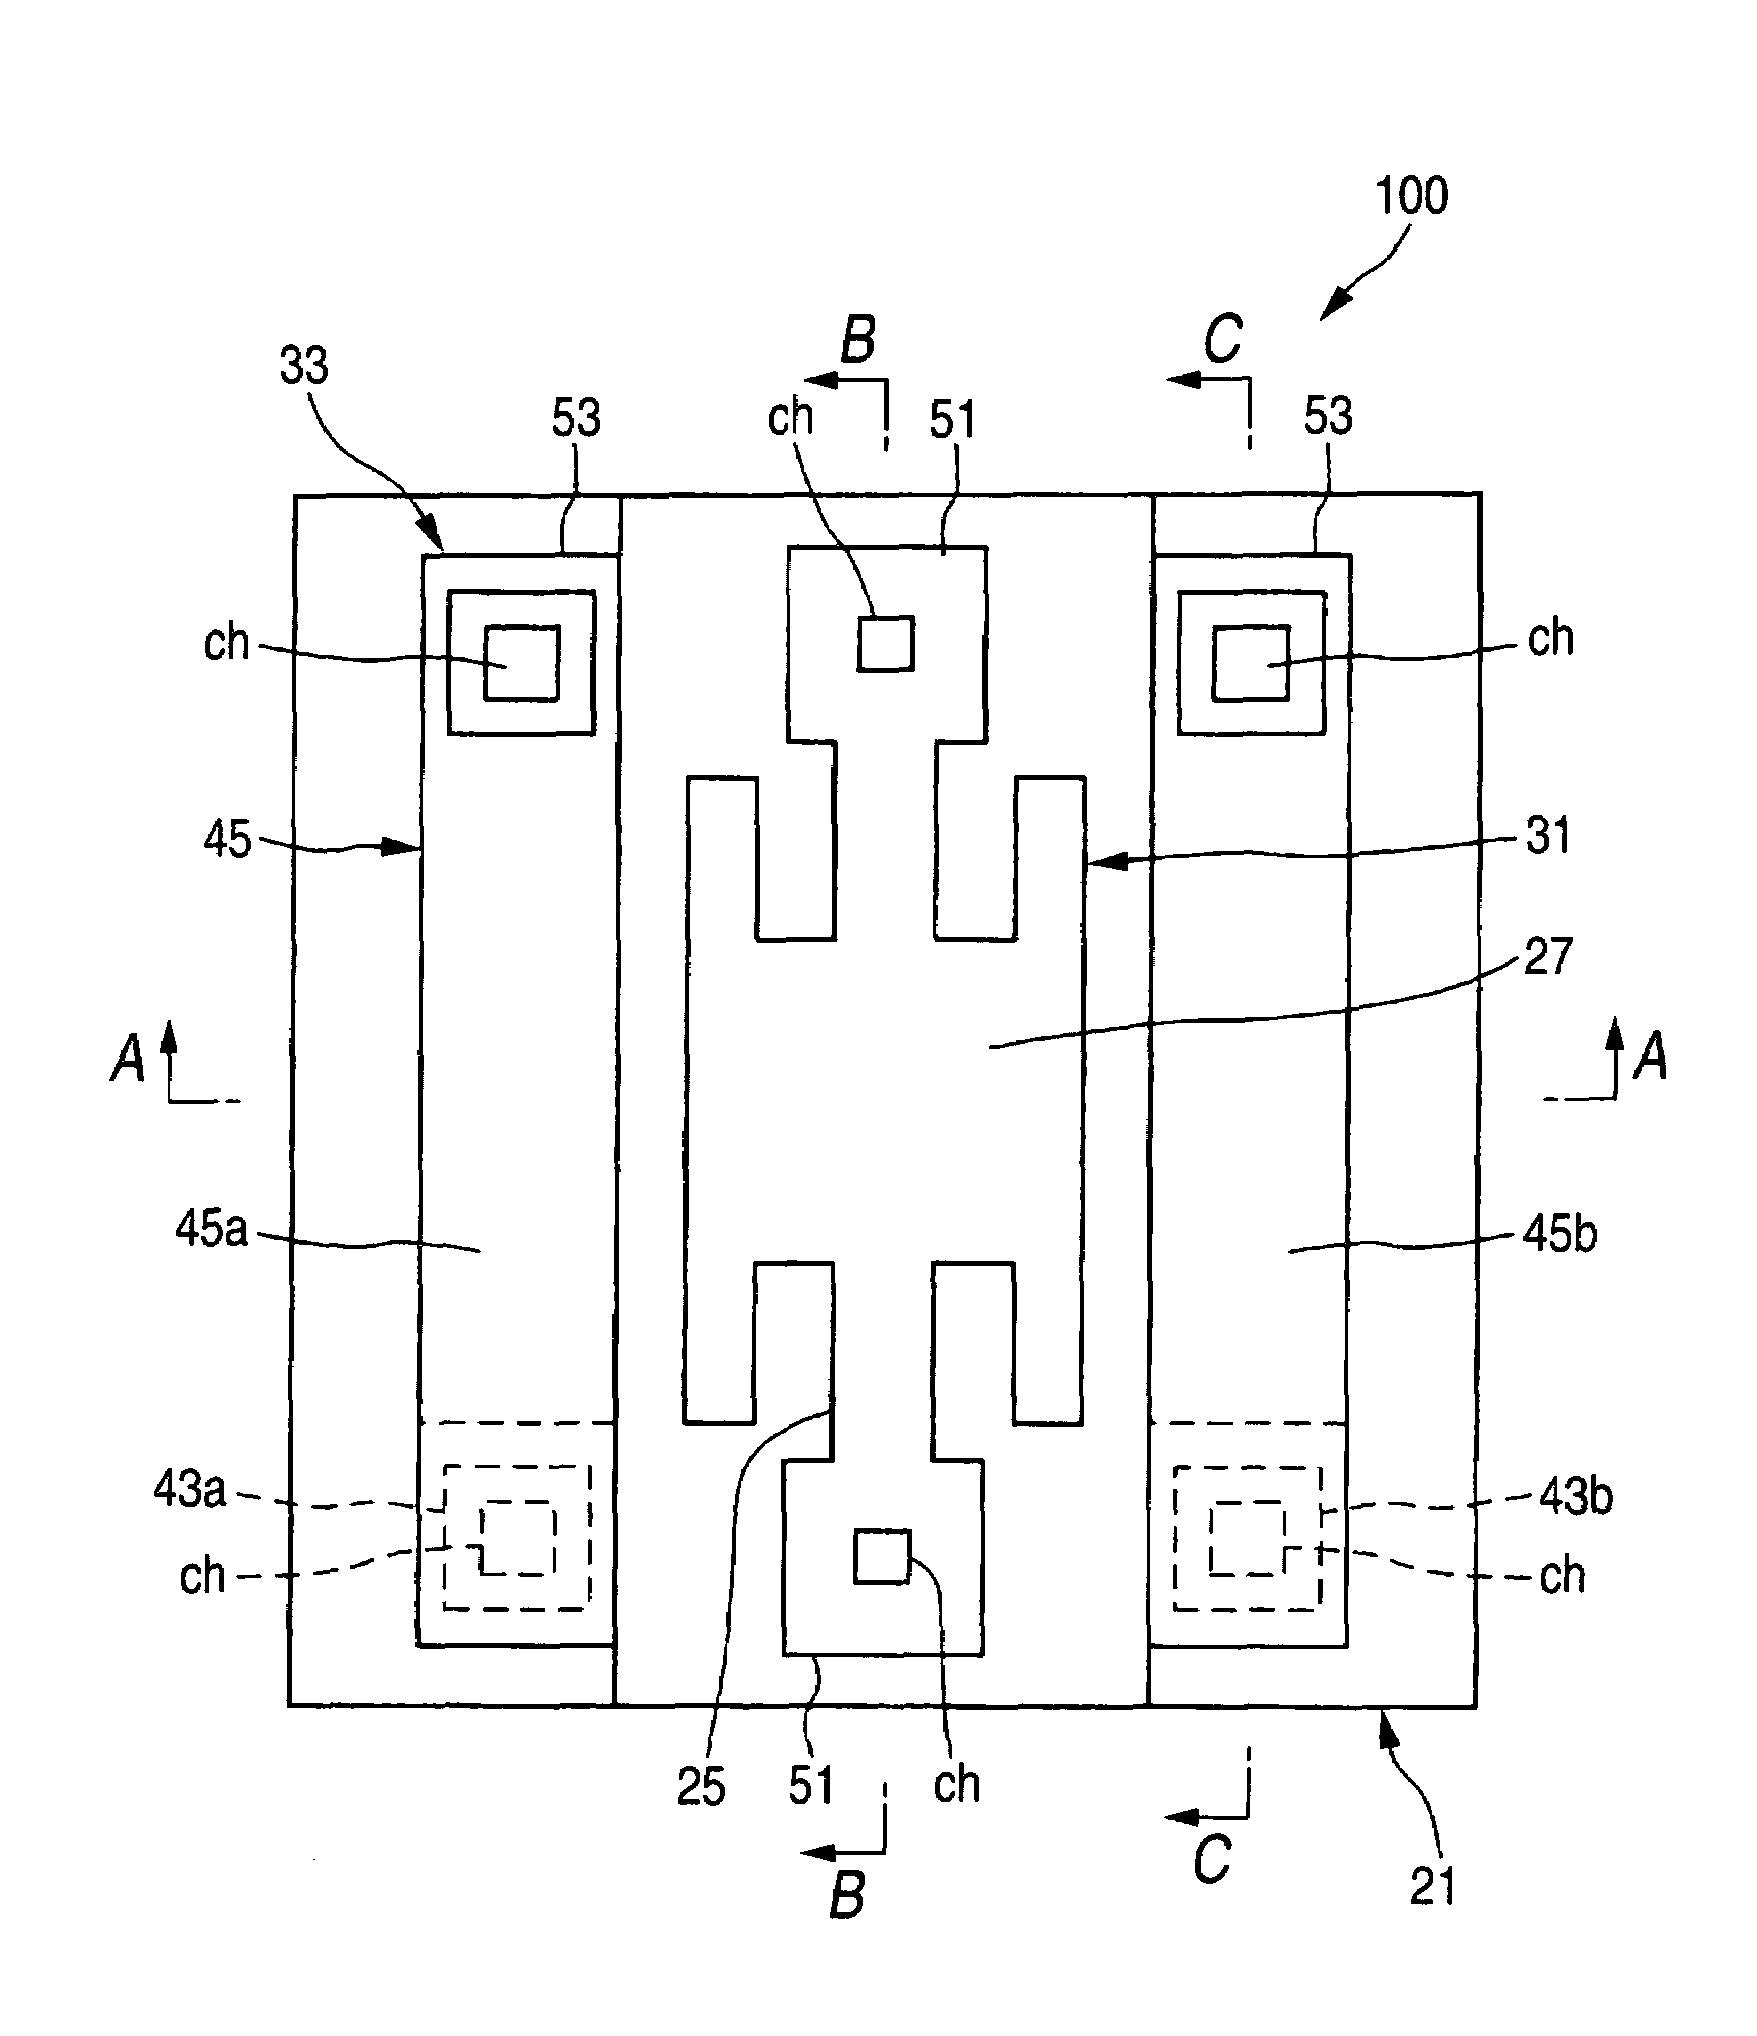 Spatial light modulator, spatial light modulator array, and exposure apparatus